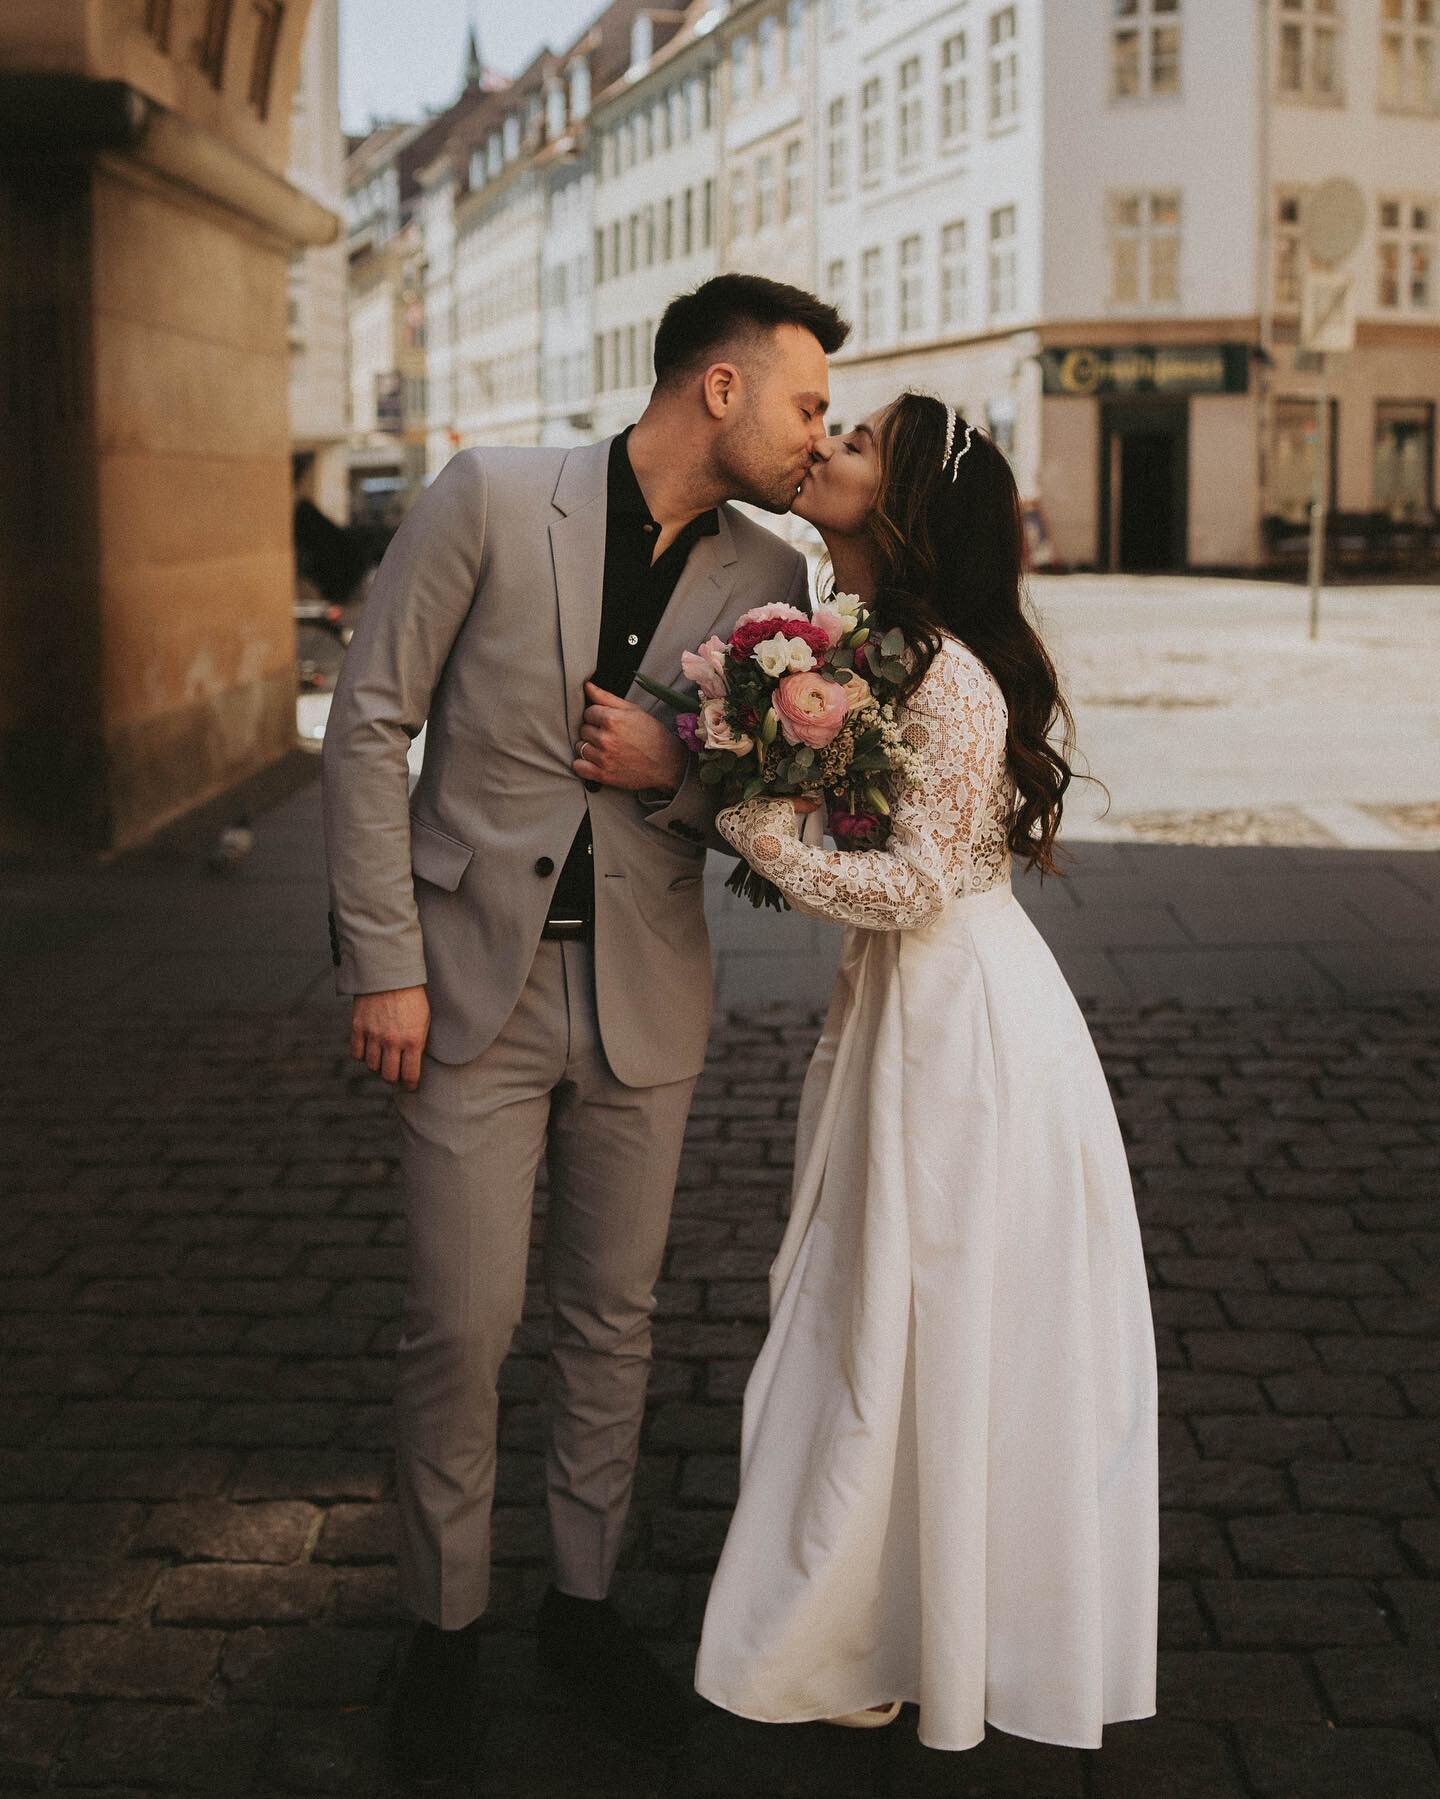 Bianca and Petru's sun-kissed wedding day in the warm time of Copenhagen.

 As the city buzzed with life, we strolled along sunny streets, capturing their love . 

Copenhagen welcomed us with warmth, creating a truly perfect day. 

Bianca &amp; Petru